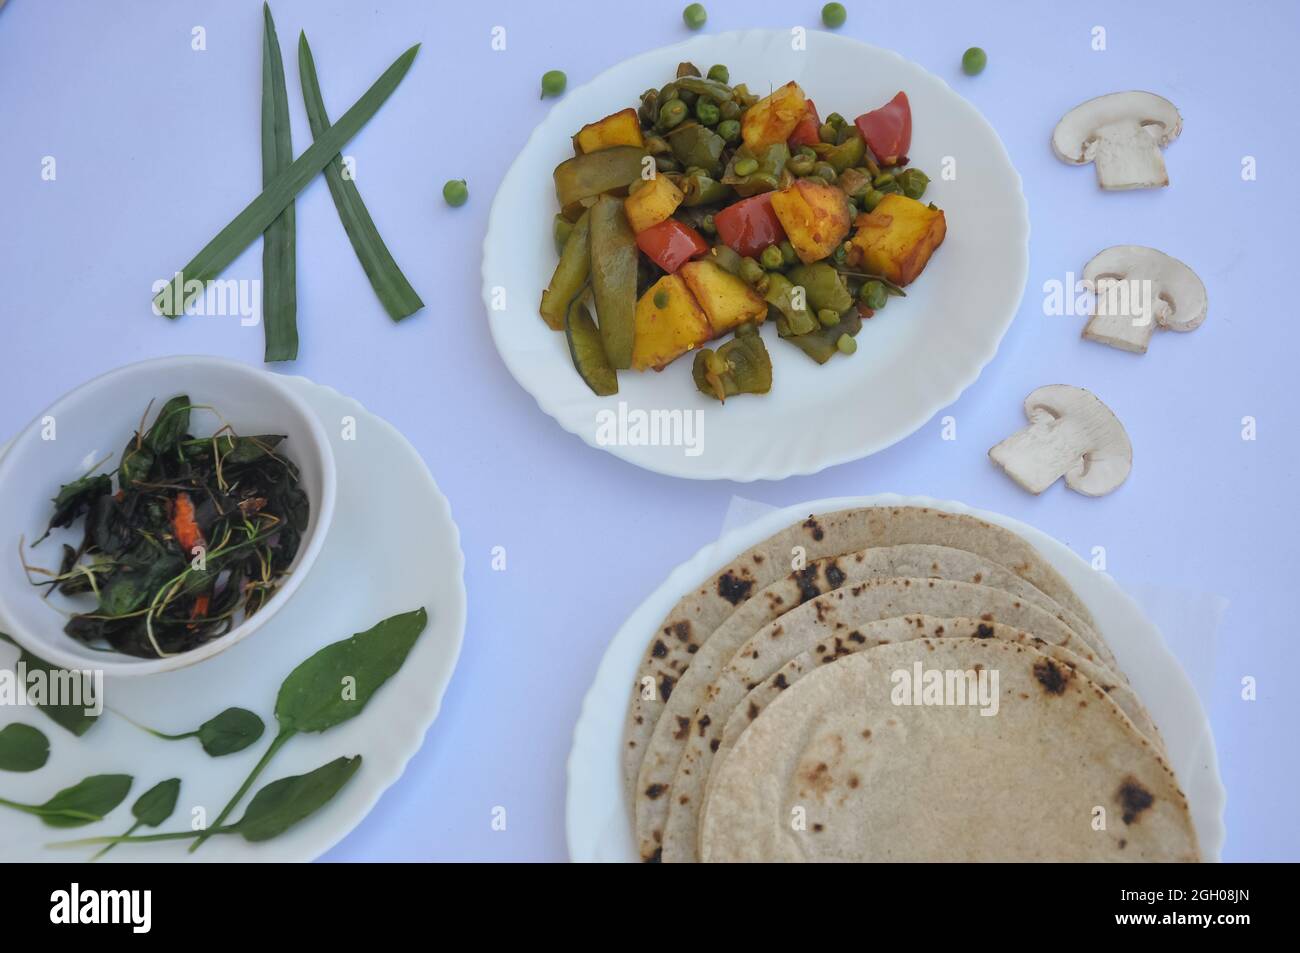 Indian Food: Flat lay of matar paneer mix veg, saag (greens) and roti (chapati) isolated over white background Stock Photo